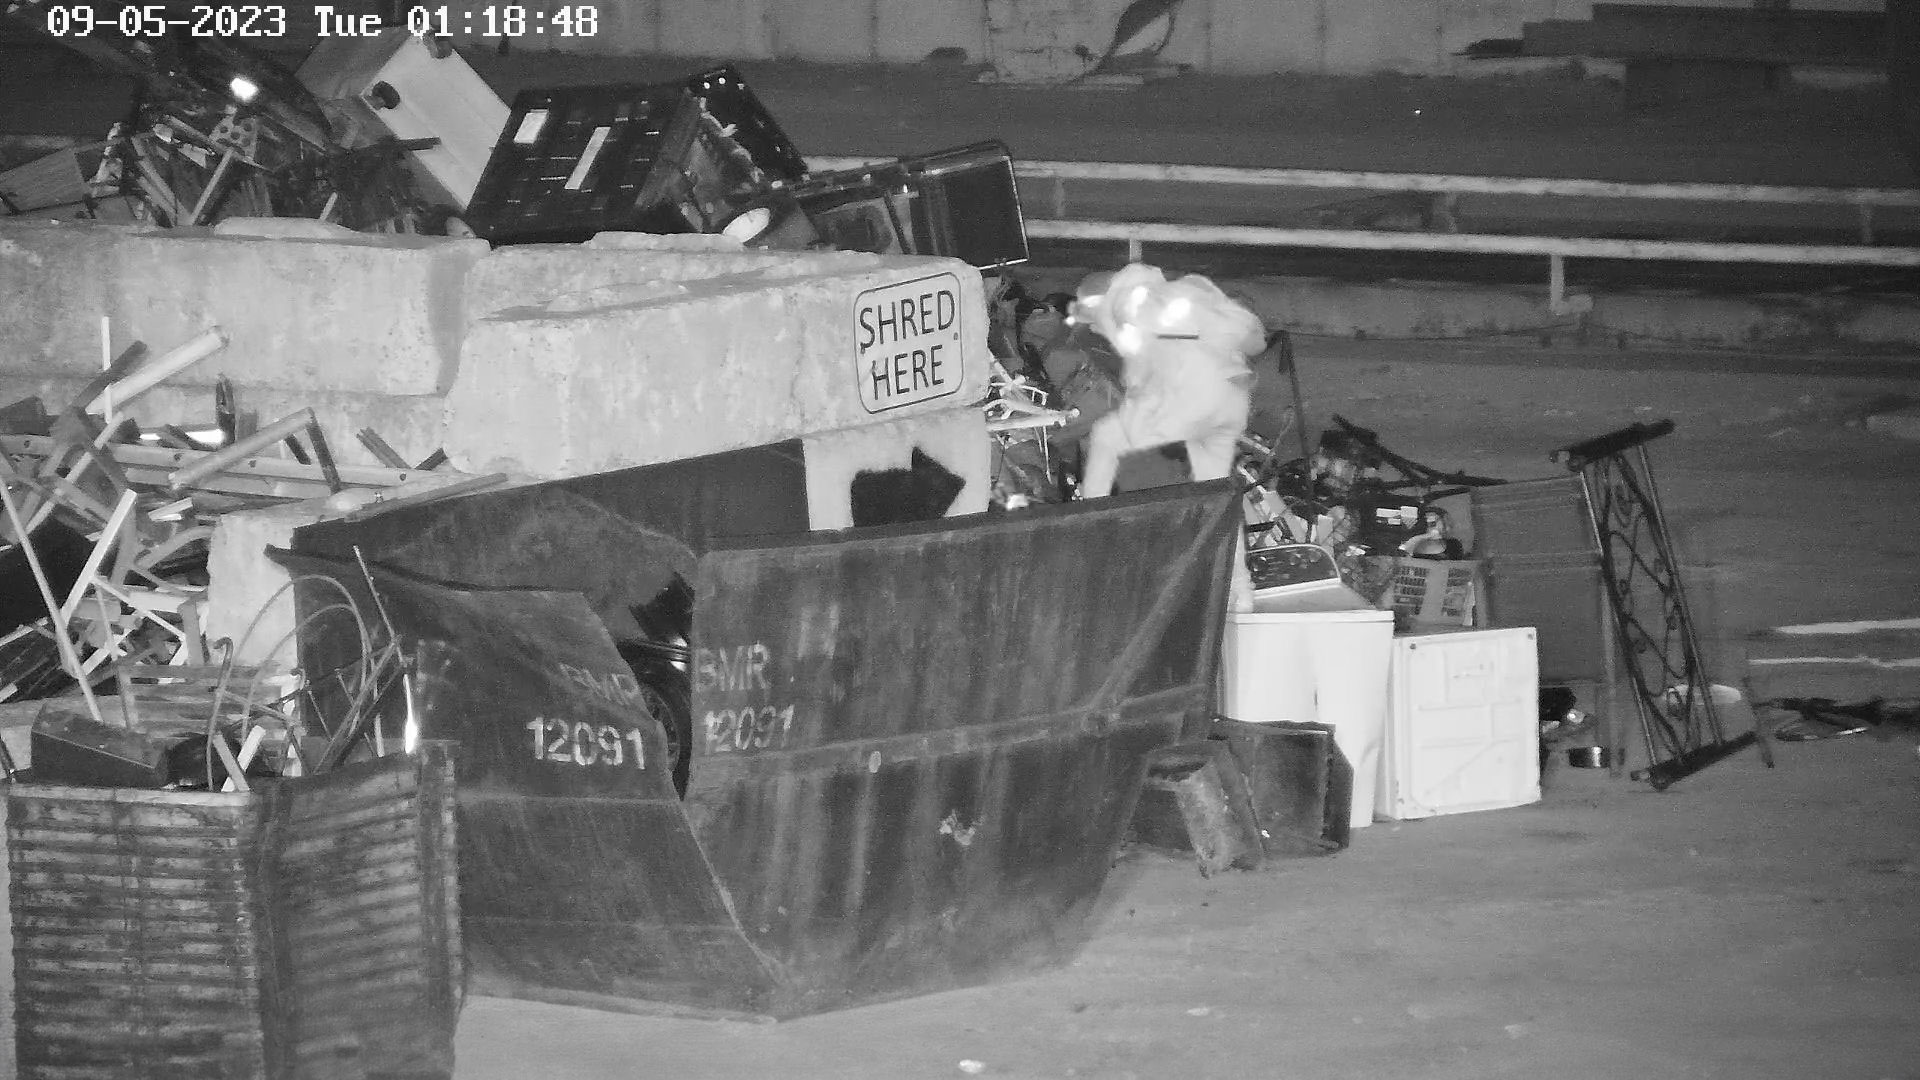 A suspect is caught on camera stealing from a recycling facility